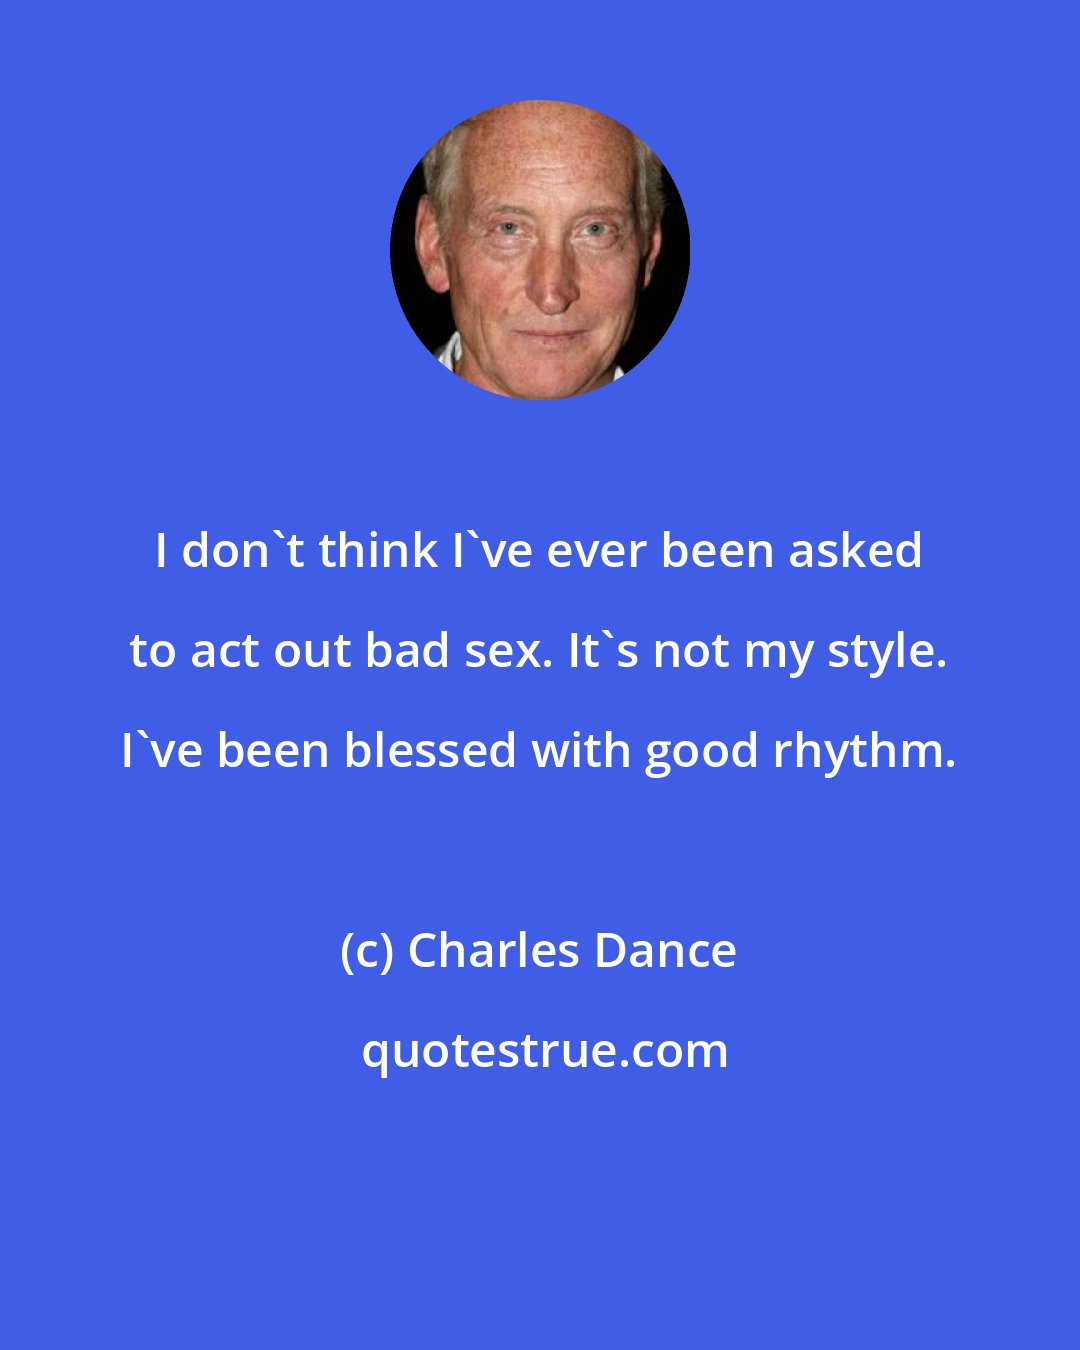 Charles Dance: I don't think I've ever been asked to act out bad sex. It's not my style. I've been blessed with good rhythm.